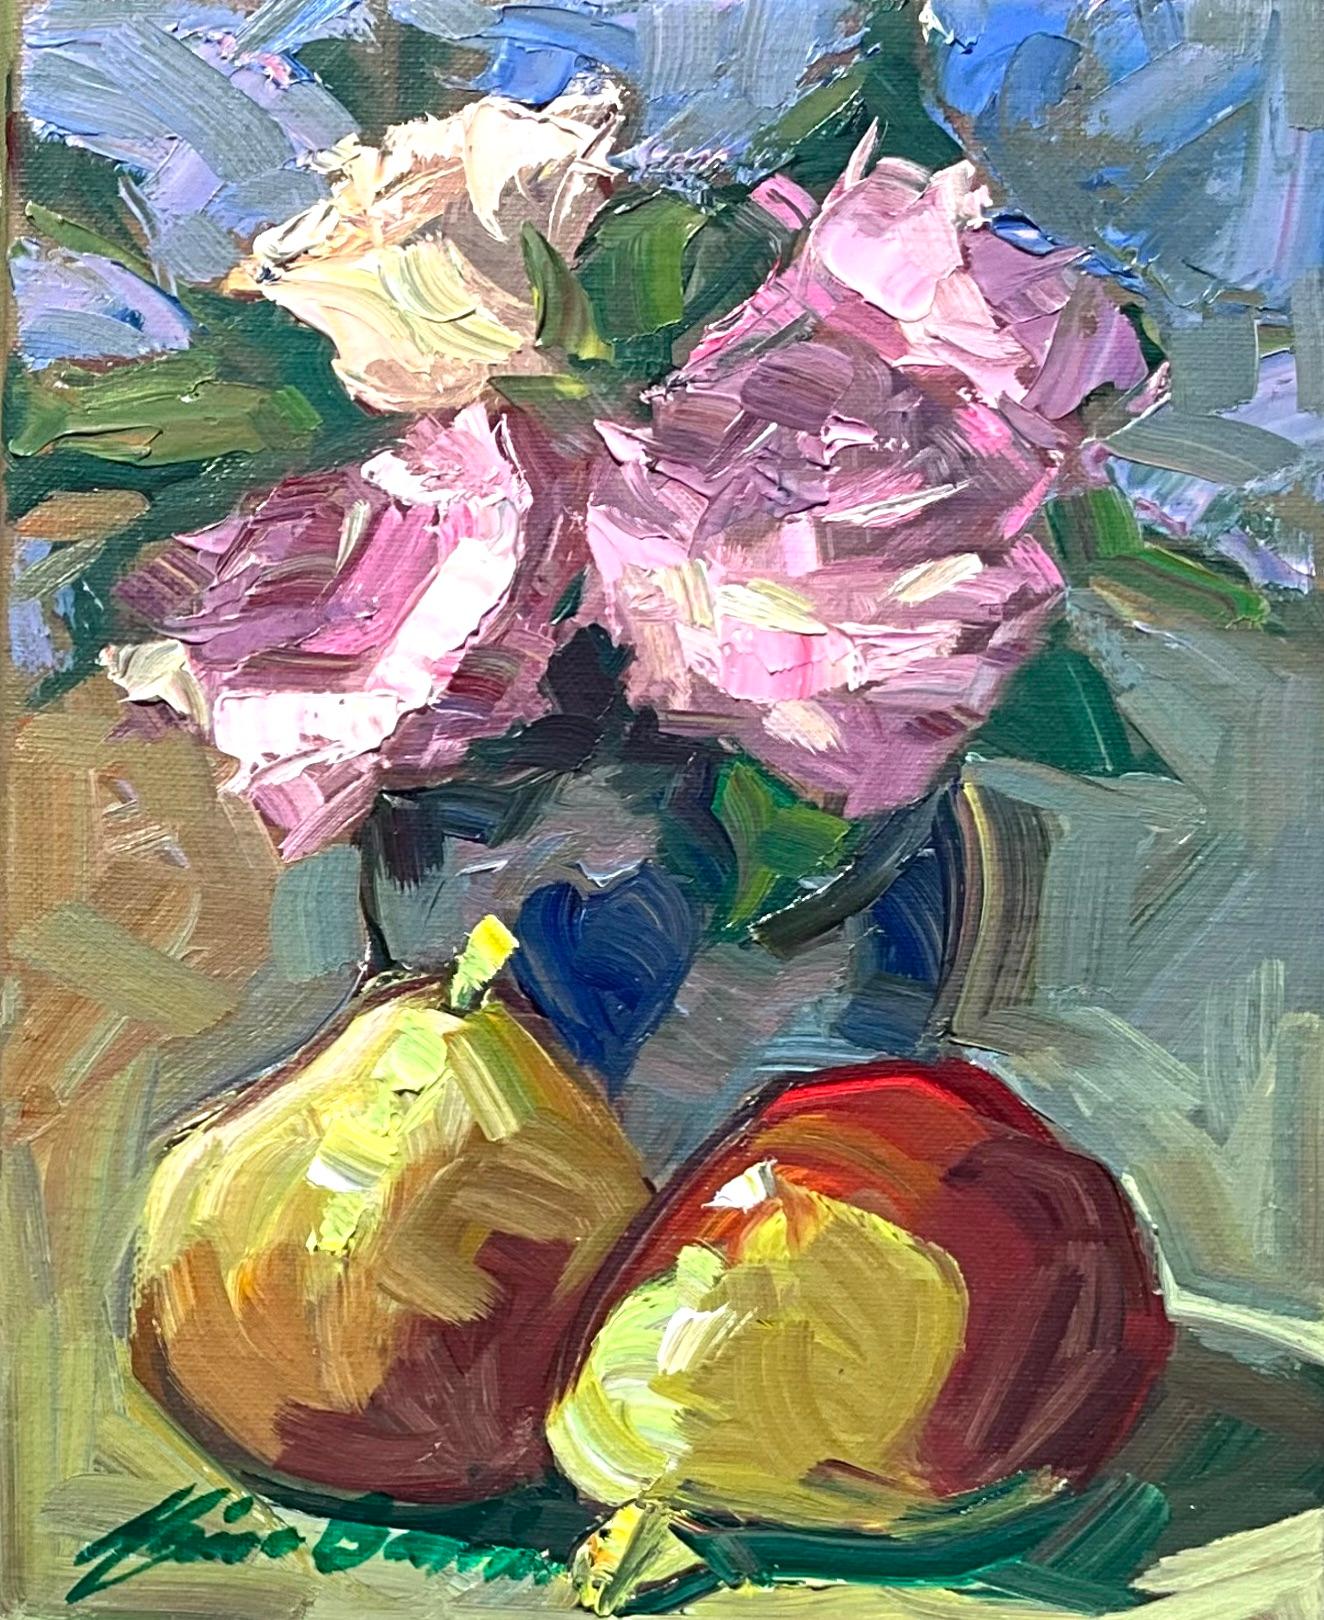 Maria Bertrán Still-Life Painting - "Roses" and Pears " Contemporary Impressionist Still Life Oil